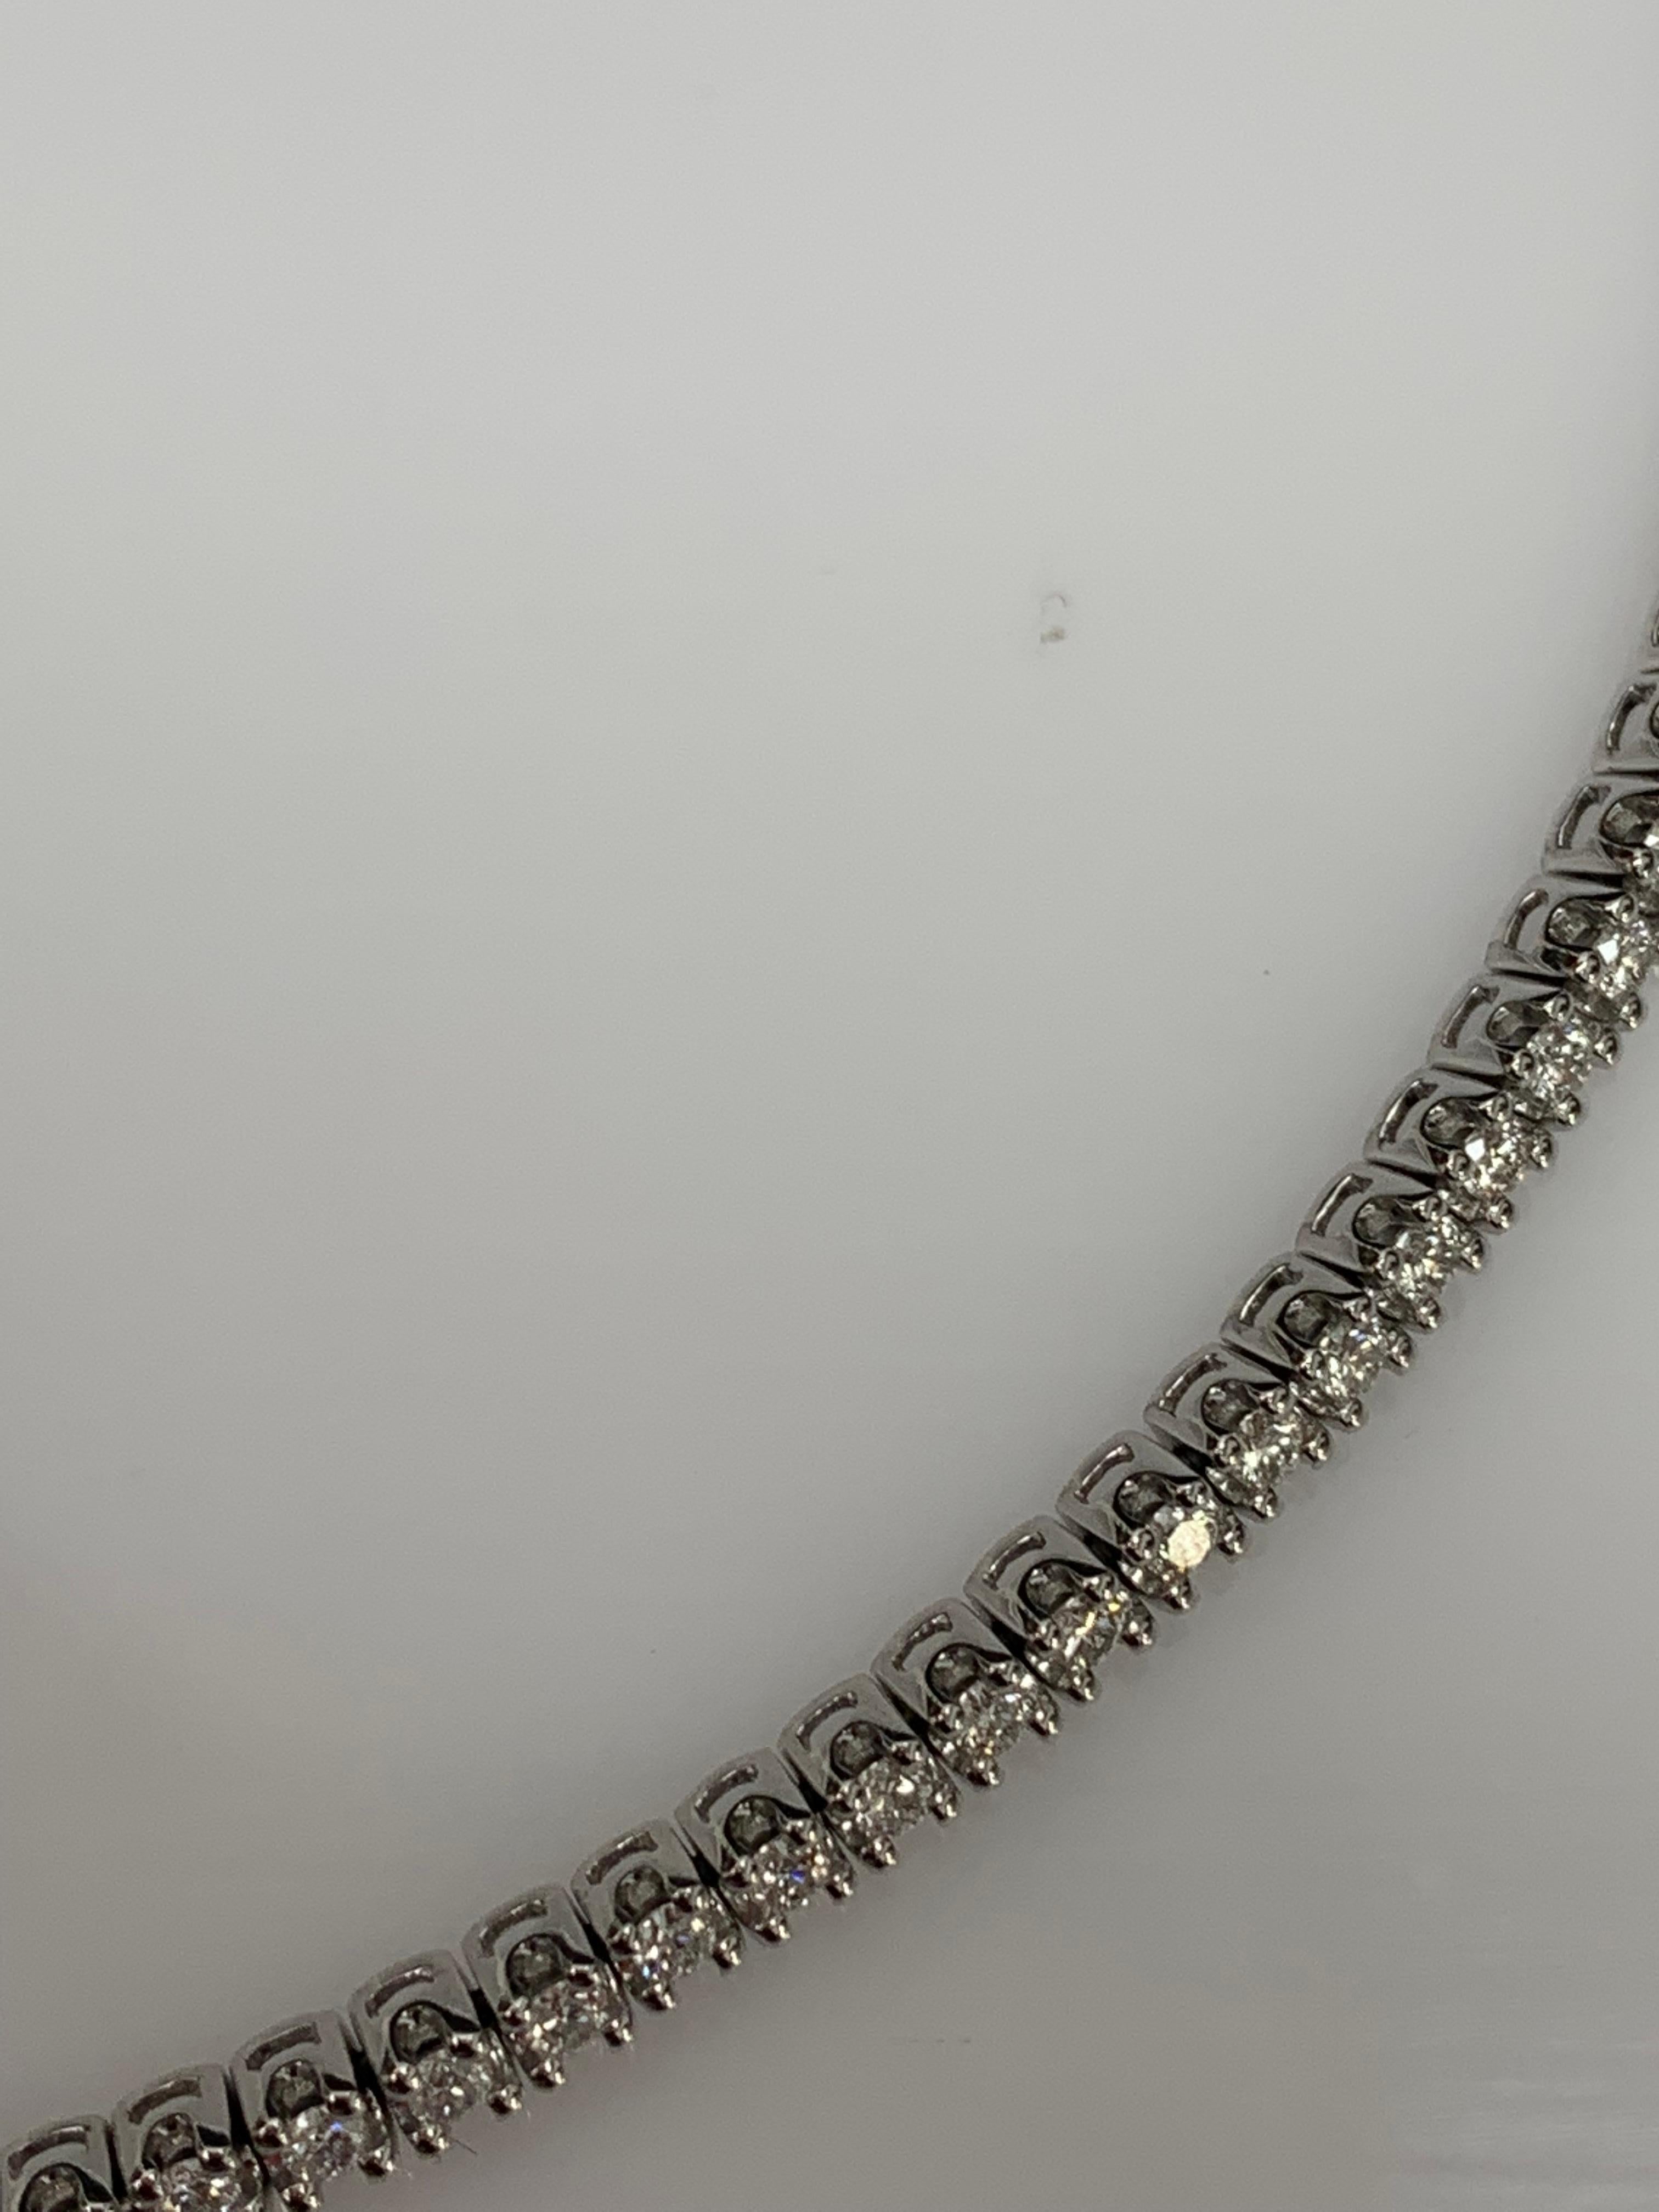 This is a Beautiful Diamond  Choker Collar Necklace that is adjustable for comfort. Crafted of 14K White Gold features 58 brilliant cut Round Diamonds weighing 1.15 carats. The necklace has a chain for different neck sizes. Available in yellow gold